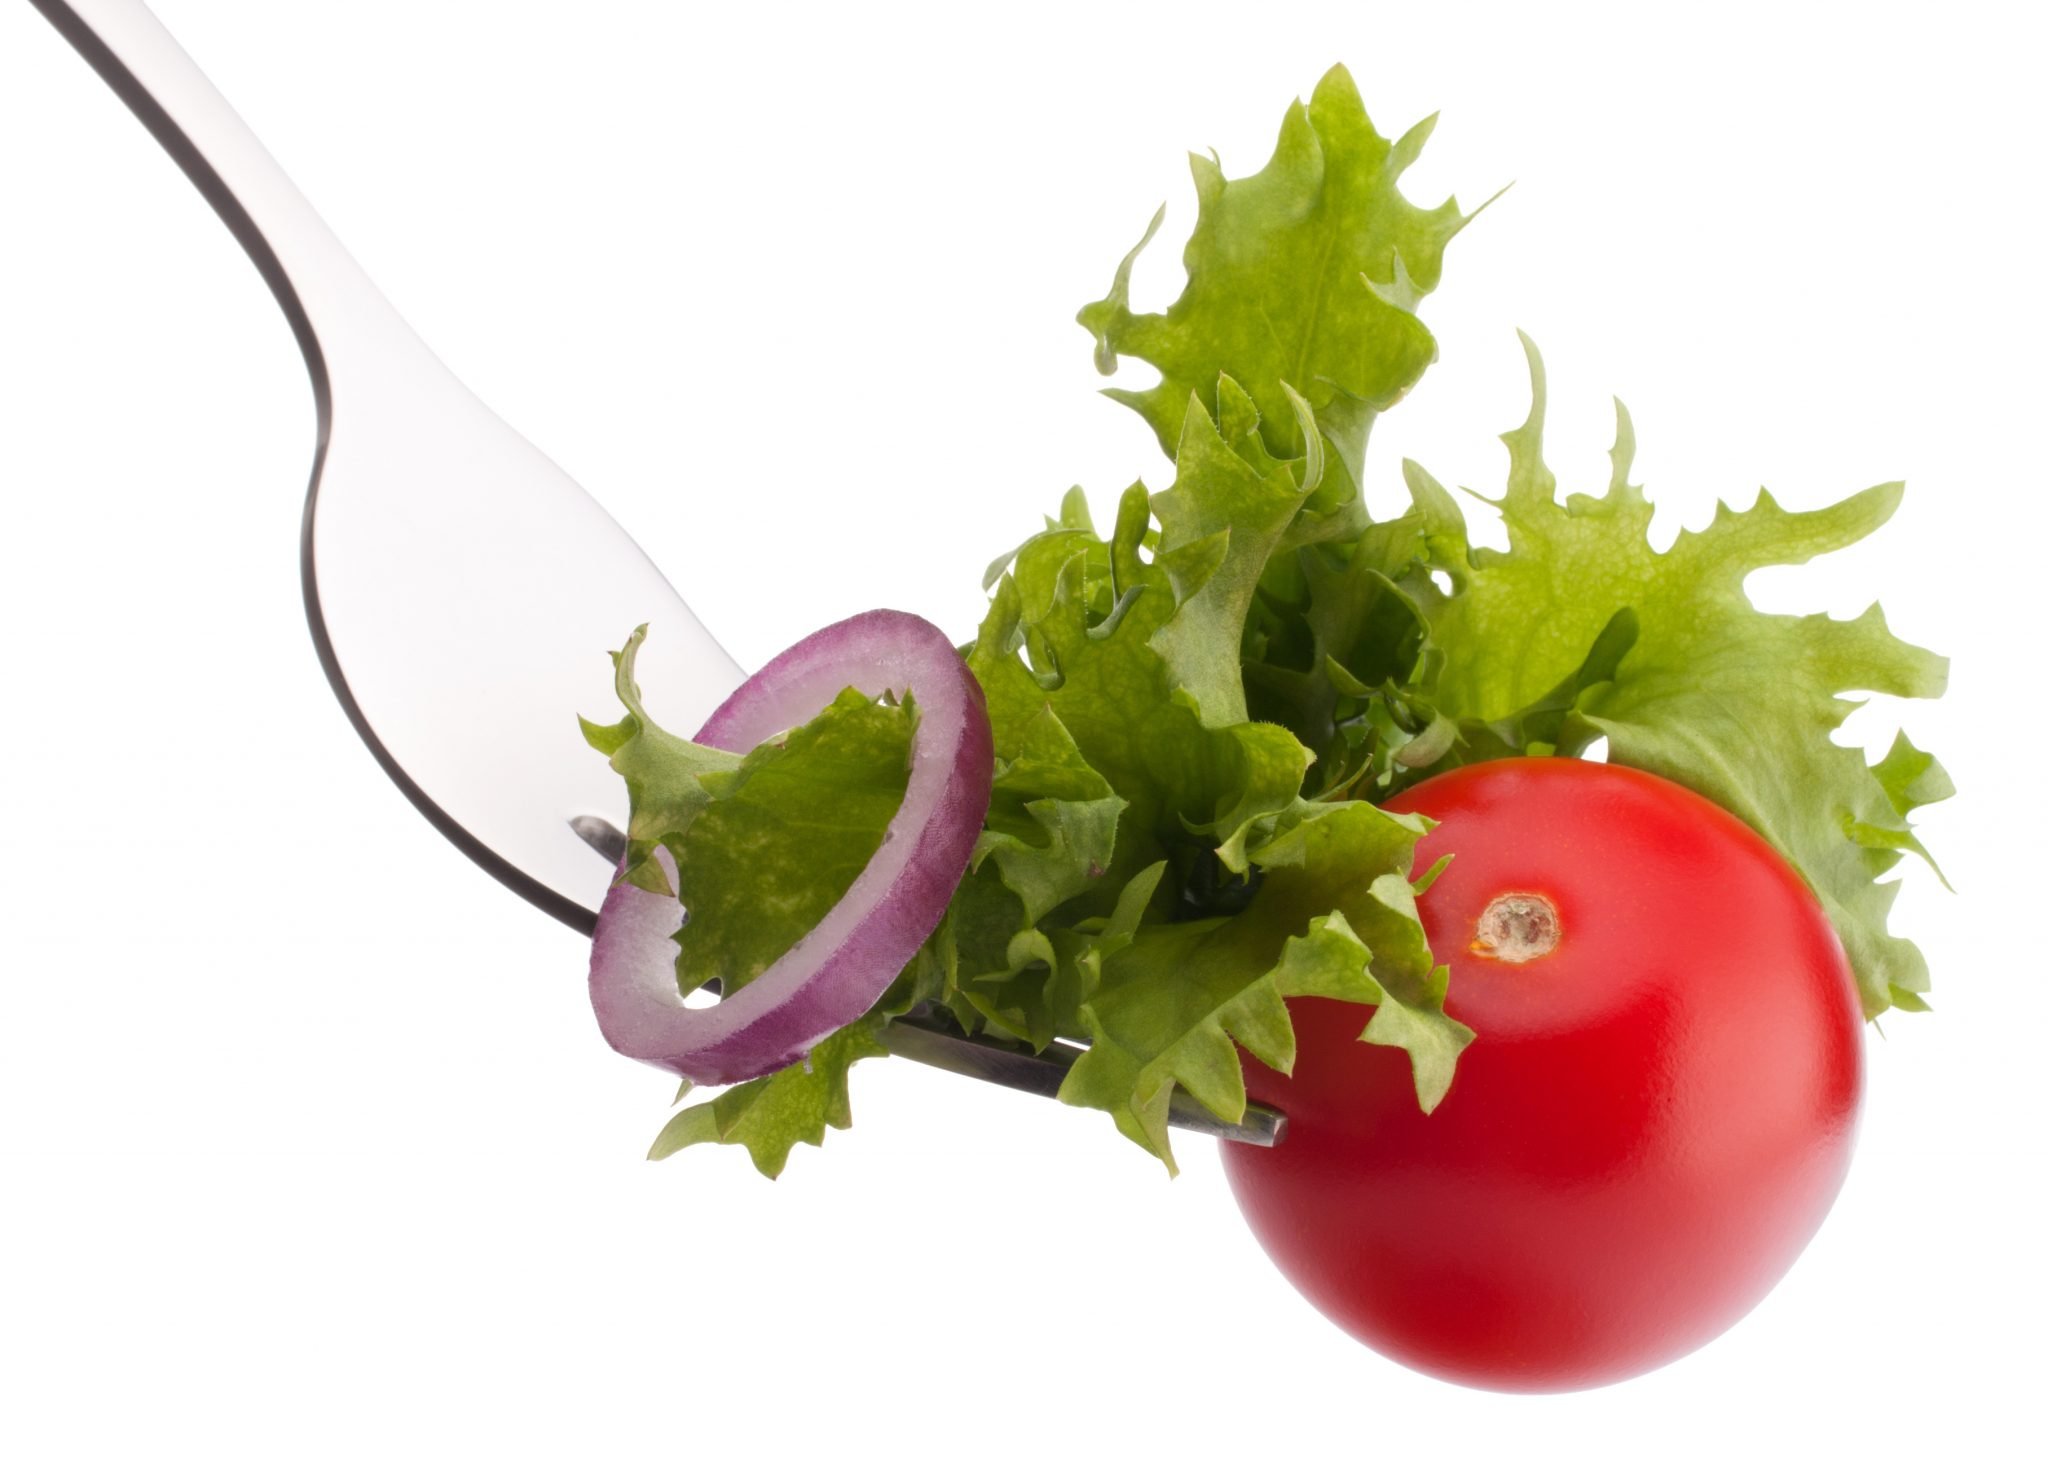 Fresh salad and cherry tomato on fork isolated on white backgrou